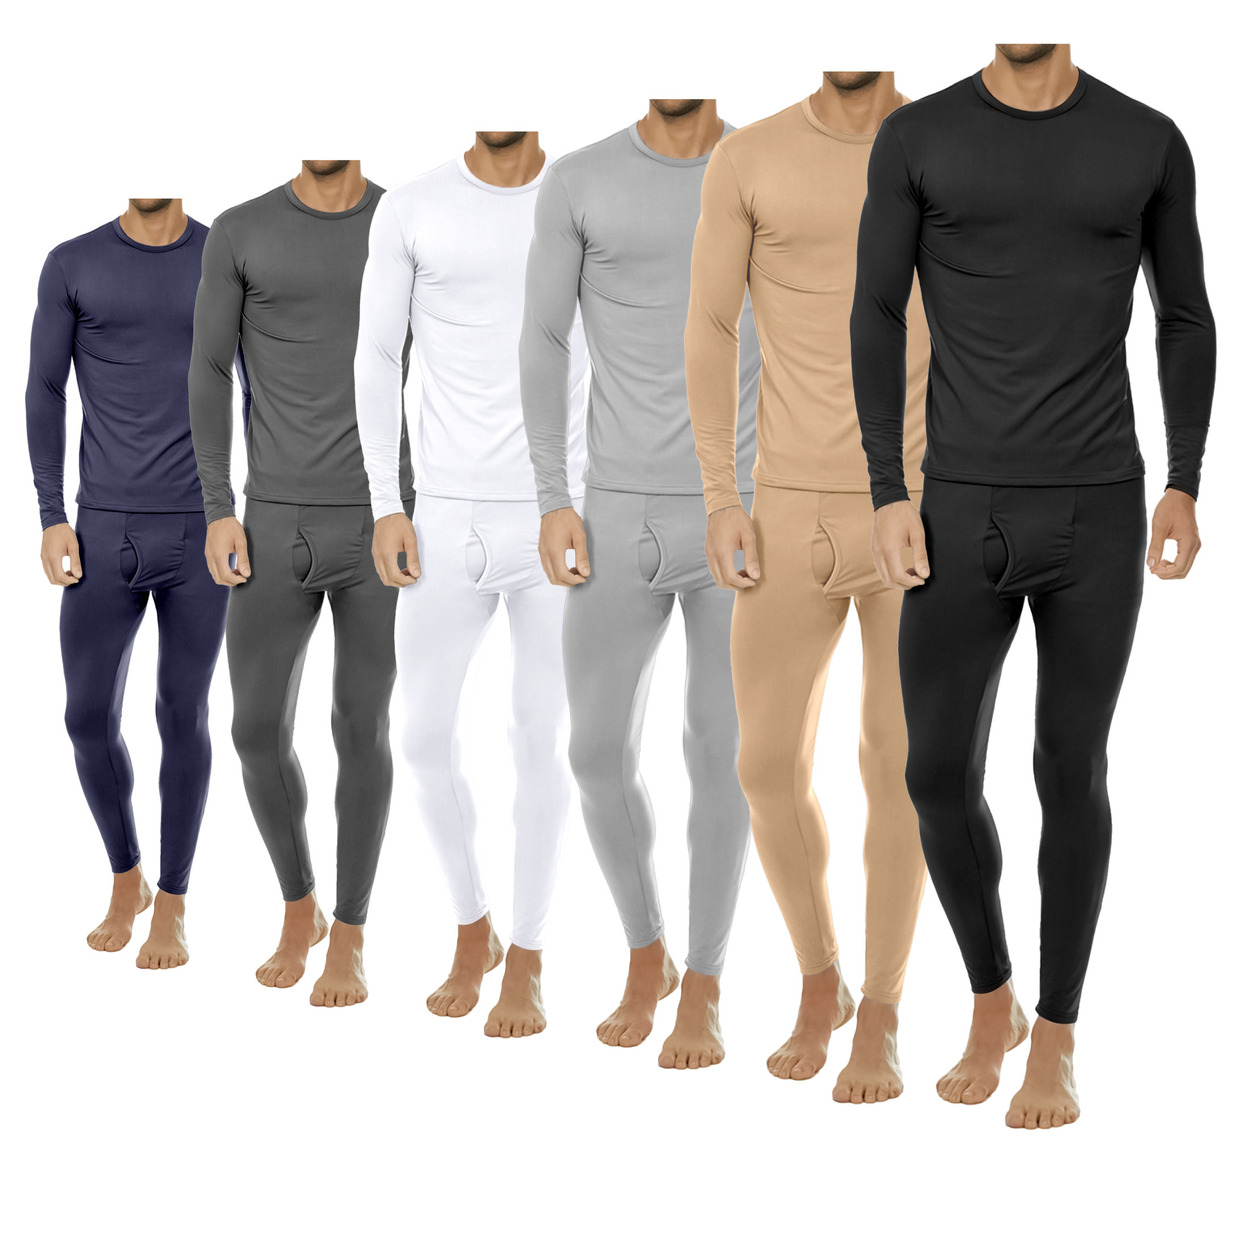 2-Sets: Men's Winter Warm Fleece Lined Thermal Underwear Set For Cold Weather - White&white, X-large